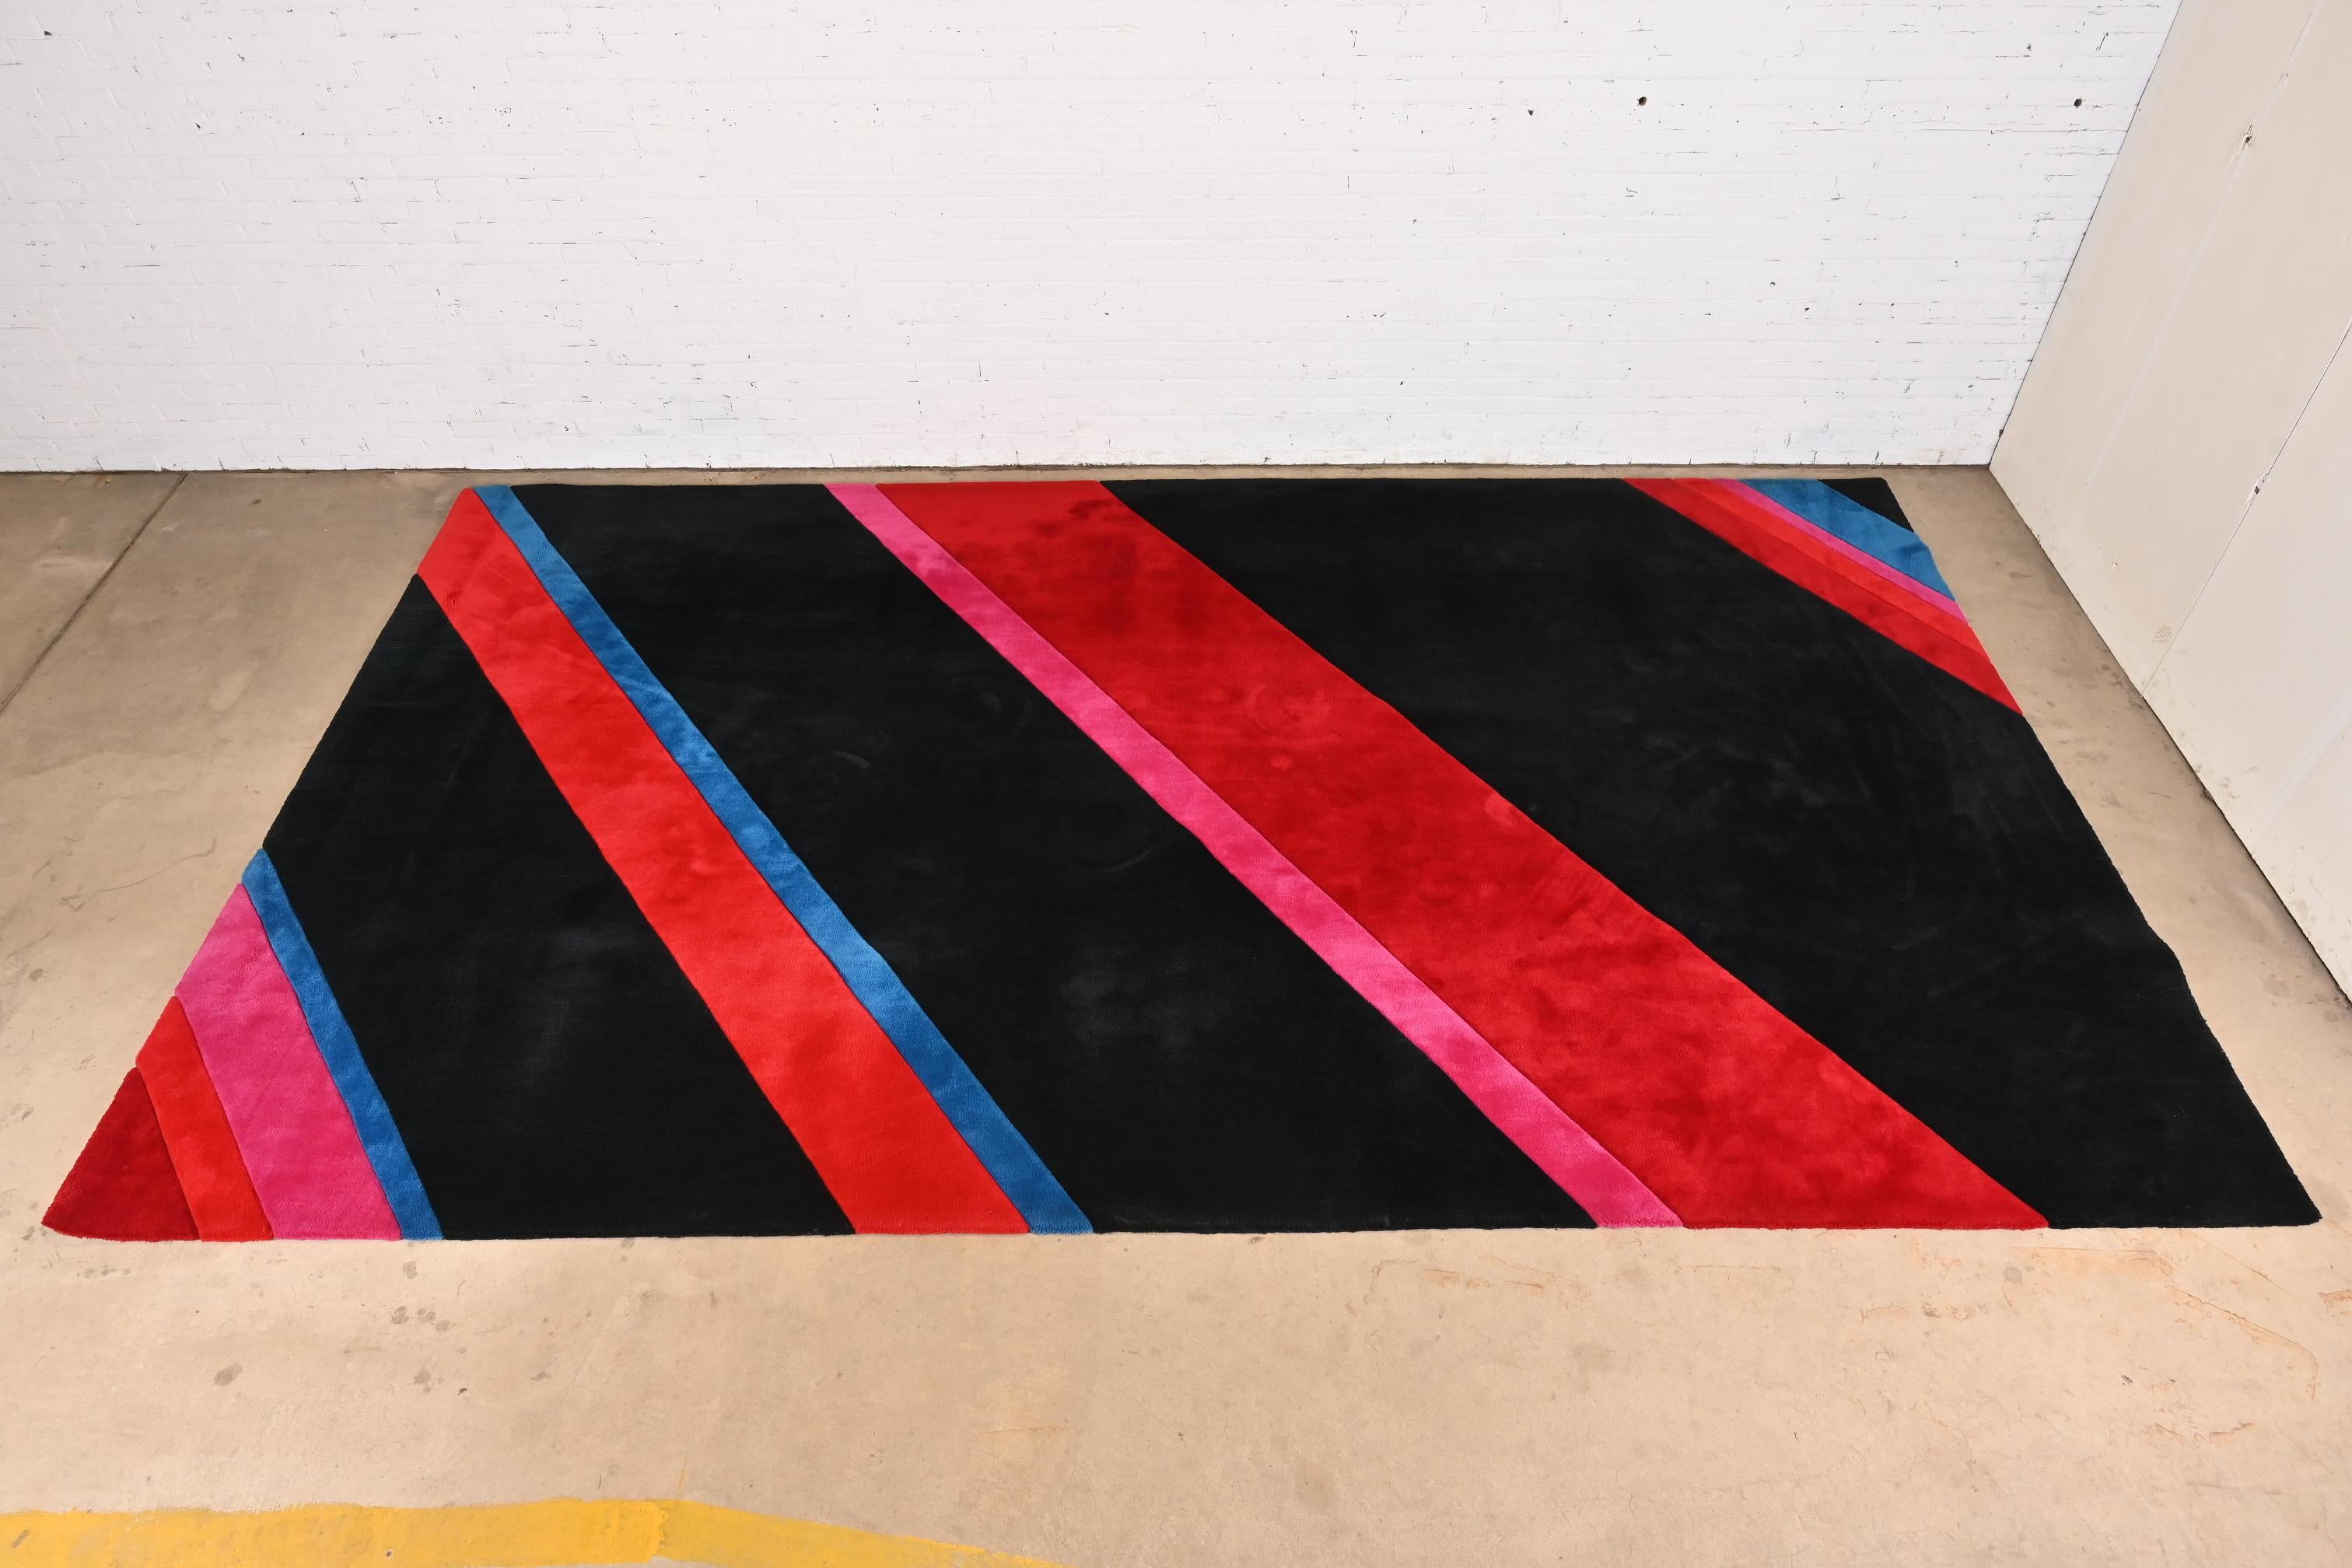 A gorgeous bespoke Modern large room size wool rug

Custom ordered from Edward Fields by Keith Conrad Design

USA, Circa 1980s

Thick wool pile, with vibrant colors in red, blue, pink, and black.

Measures: 9'4